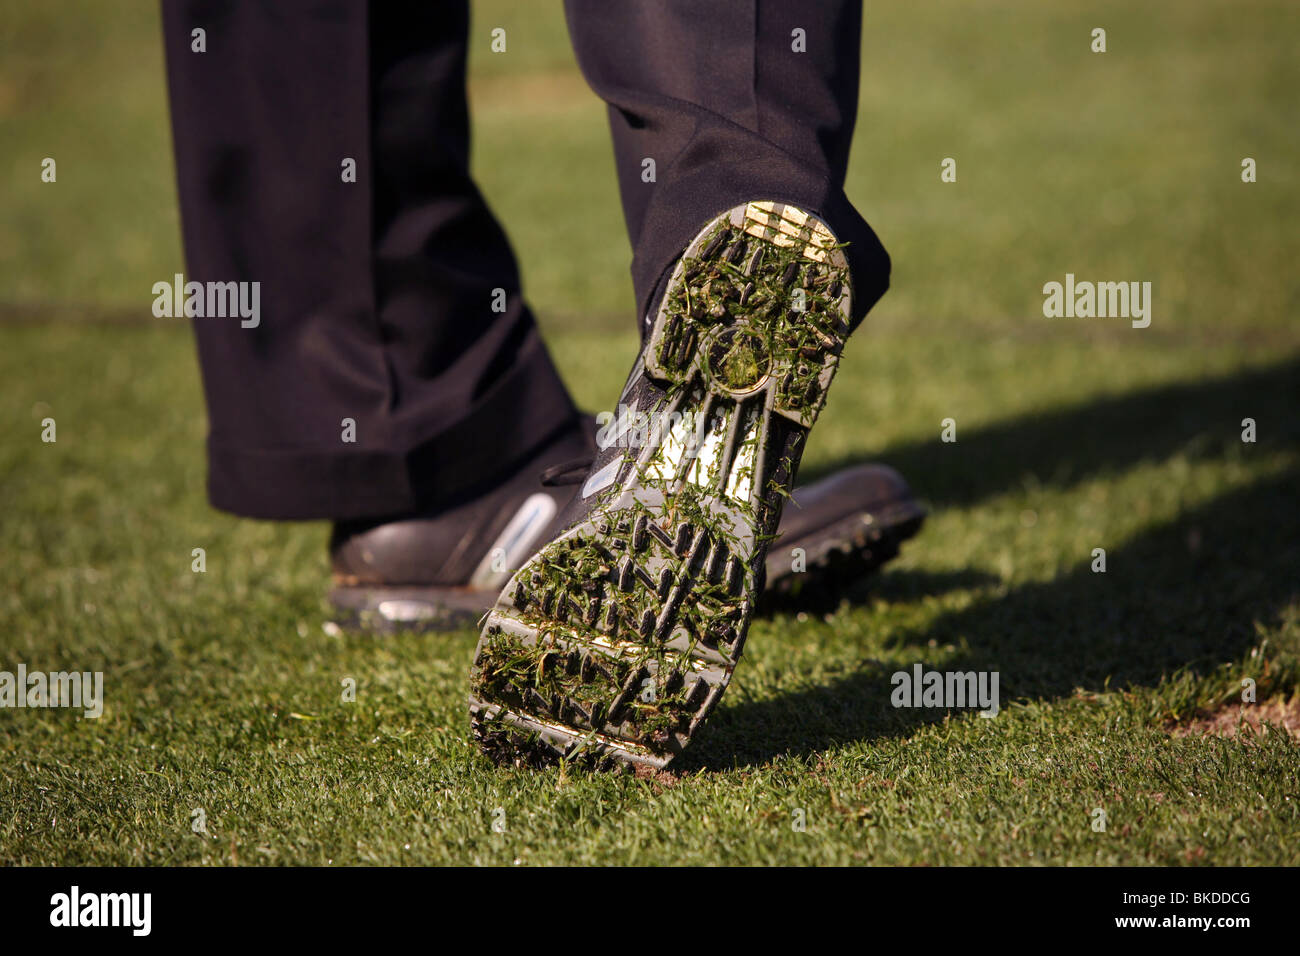 Bottom of Golf Show After Teeing Off Stock Photo - Alamy